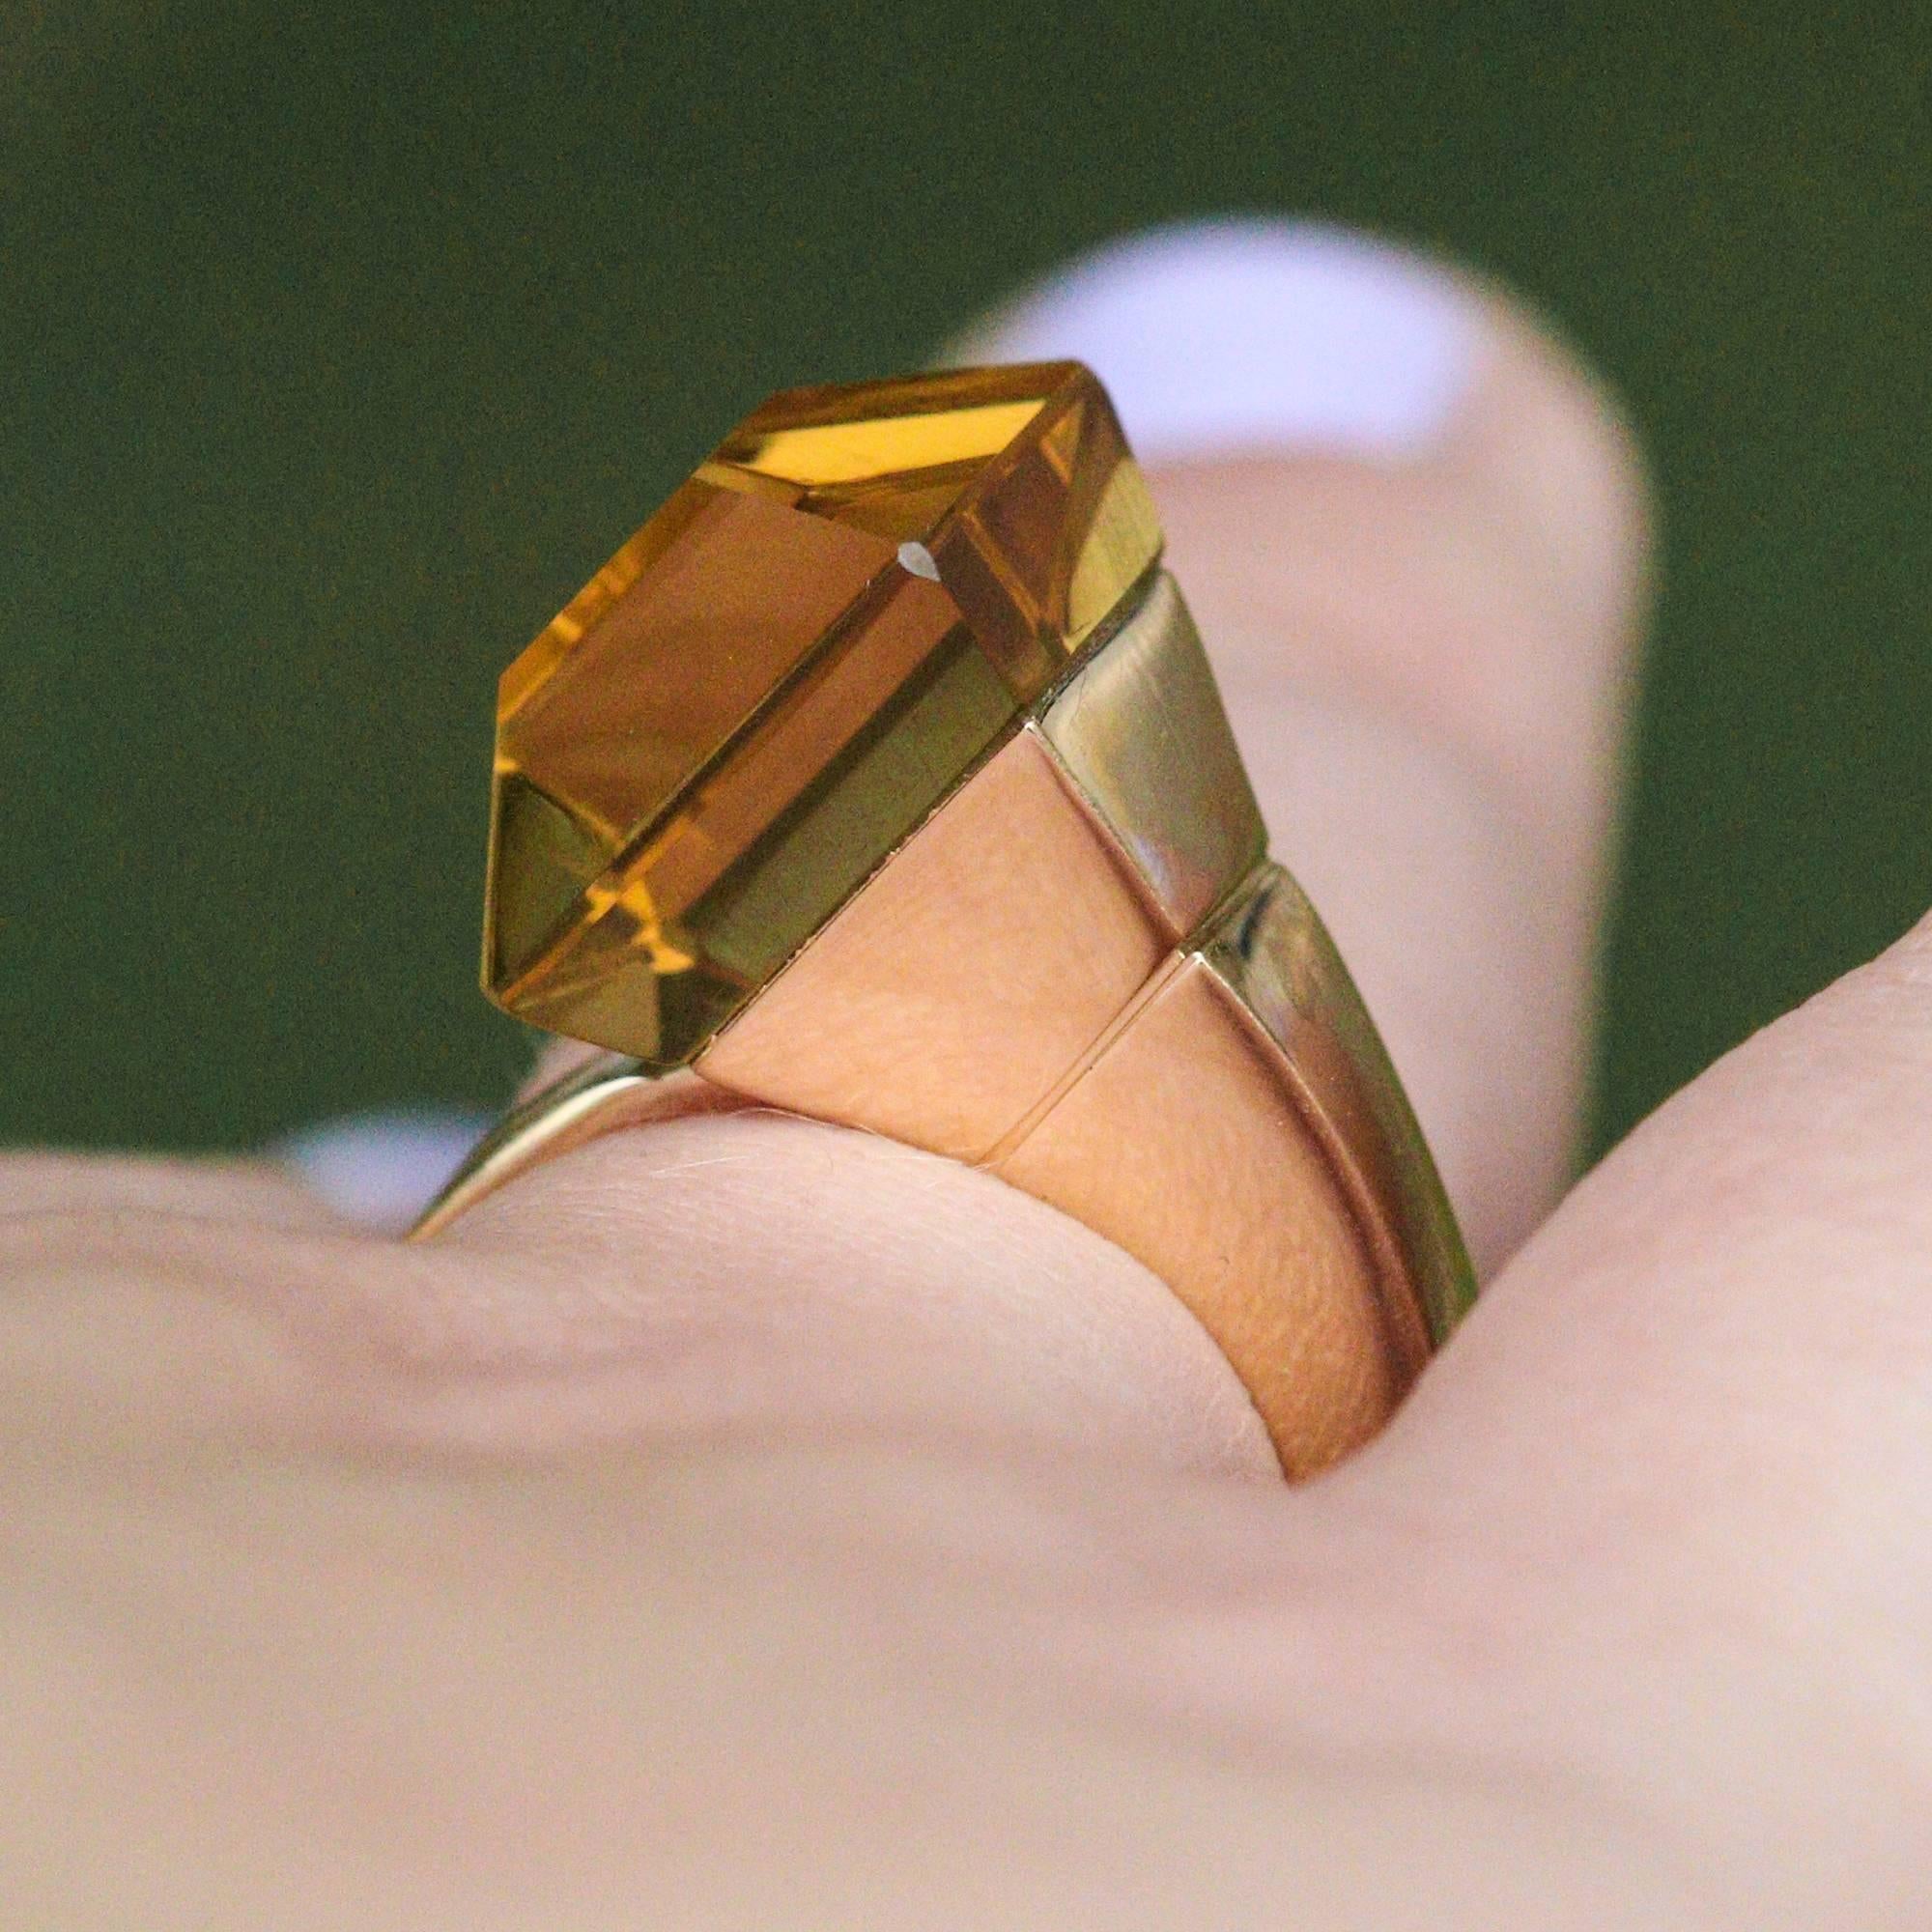 This beautiful and unique Chiodo ring by Gucci features a 12 x 12mm step cut citrine set asymmetrically at the top of the ring. The stone is set in a very unique way that provides mystery in regard to how the stone is held in place. The setting is